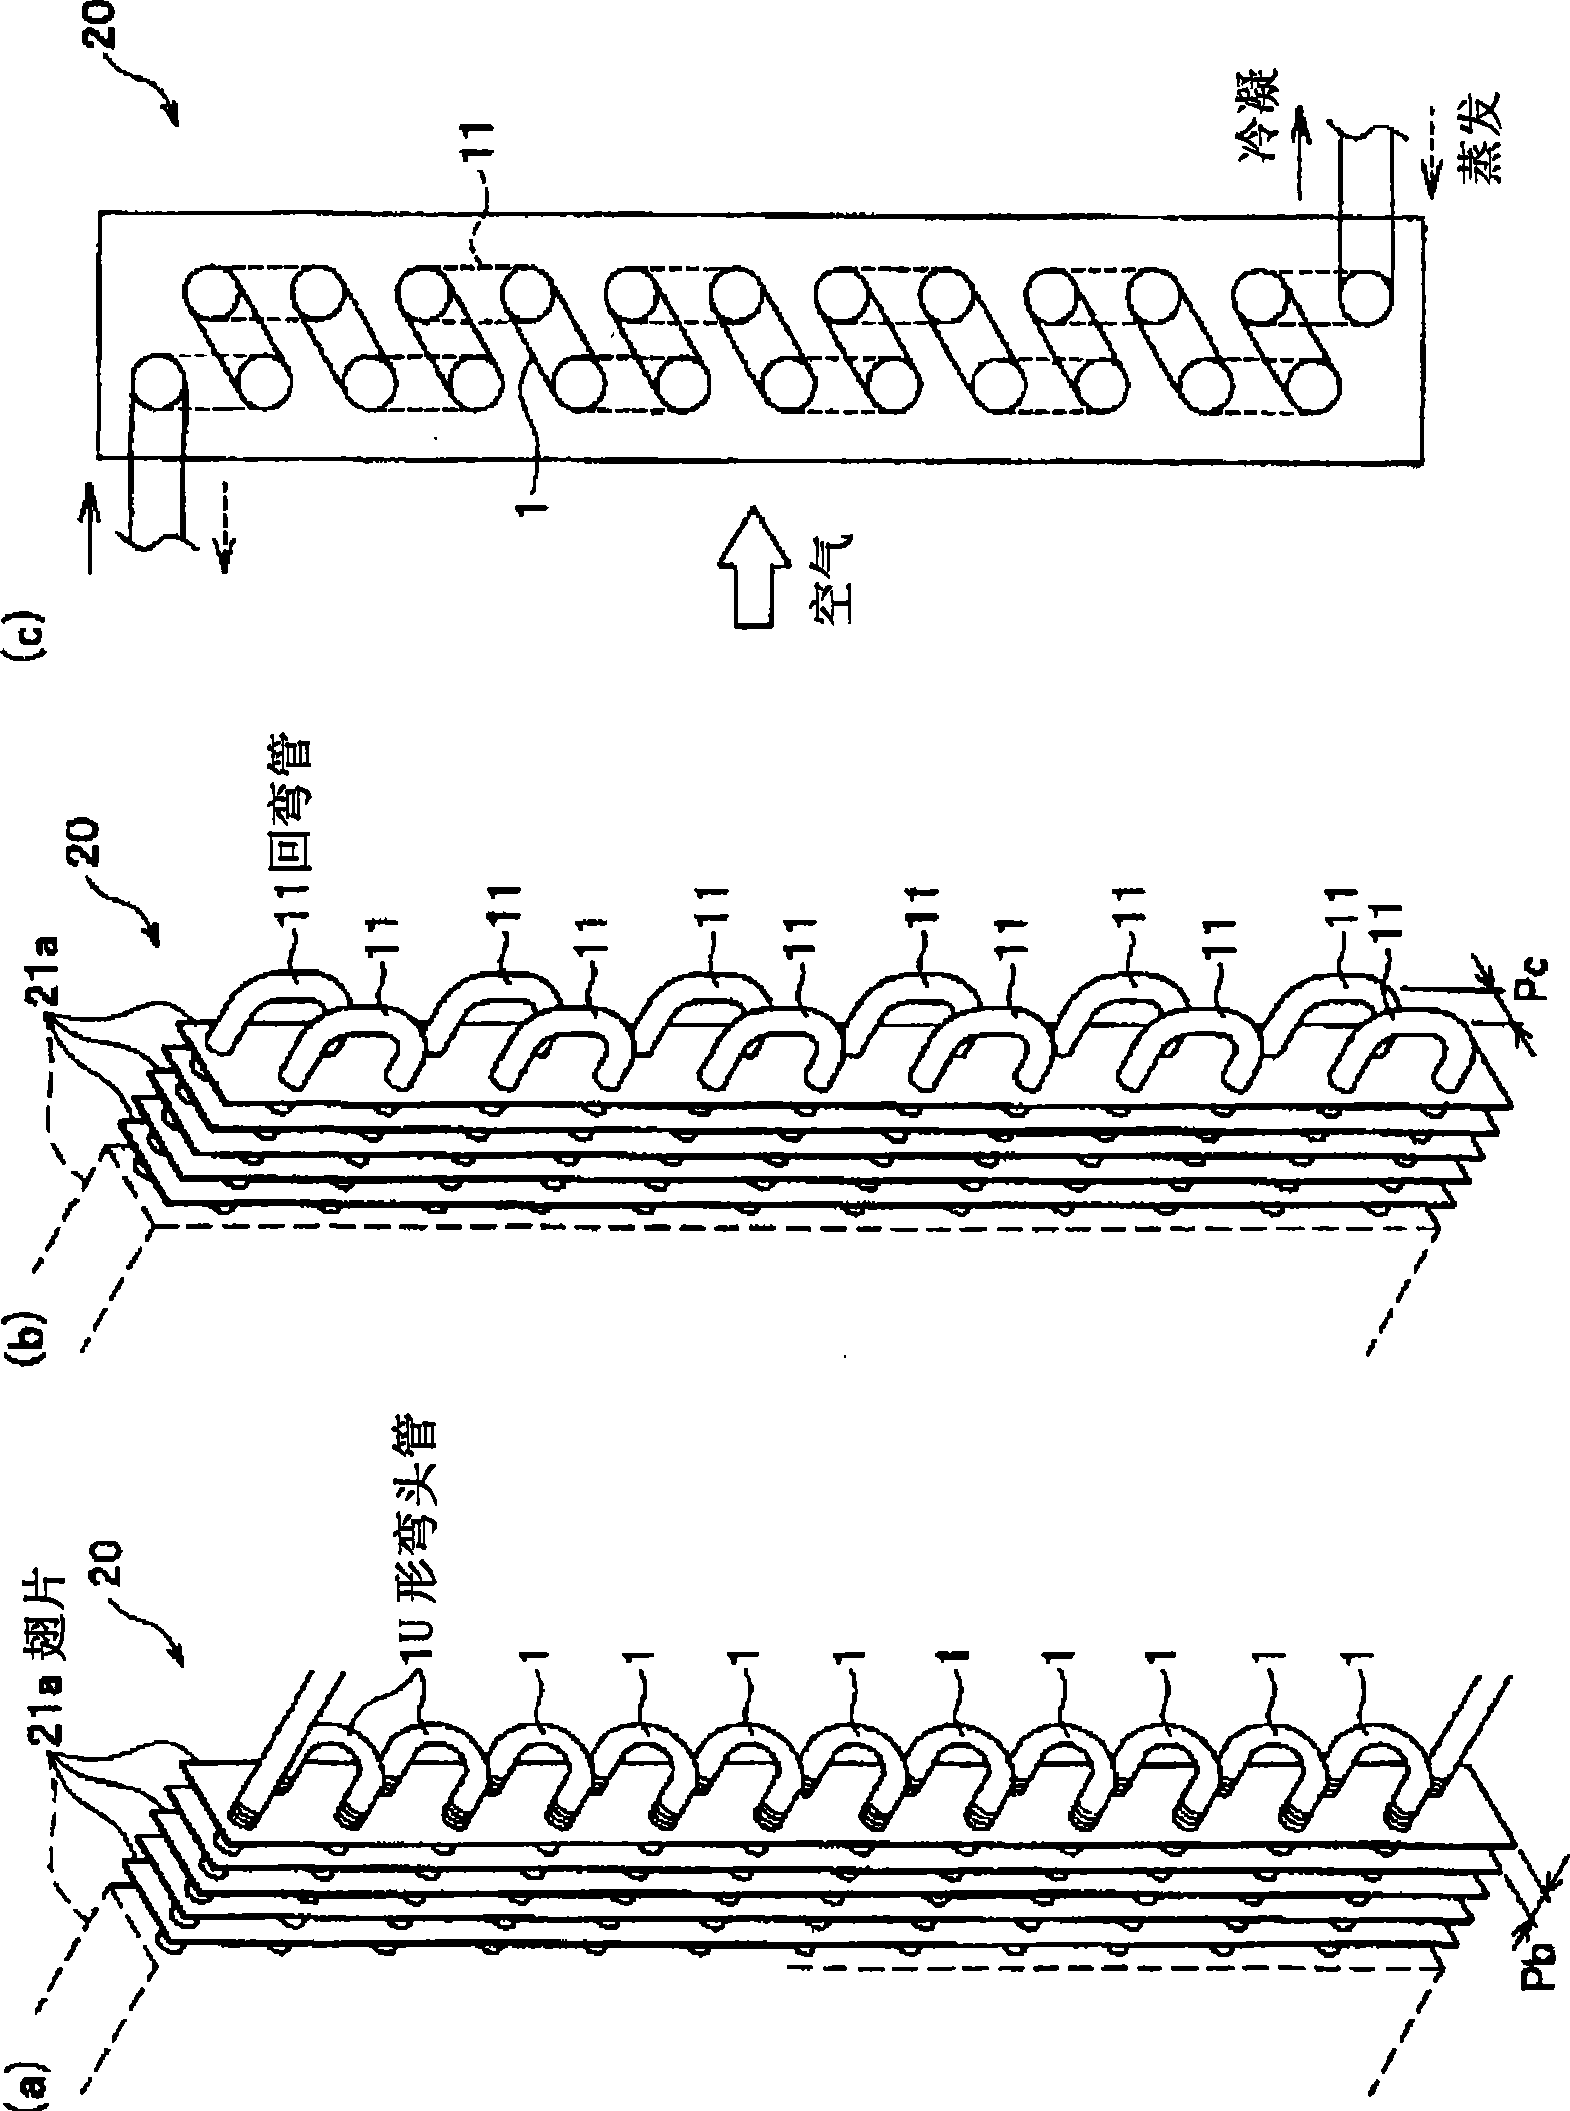 Fin-and-tube type heat exchanger, and its return bend pipe